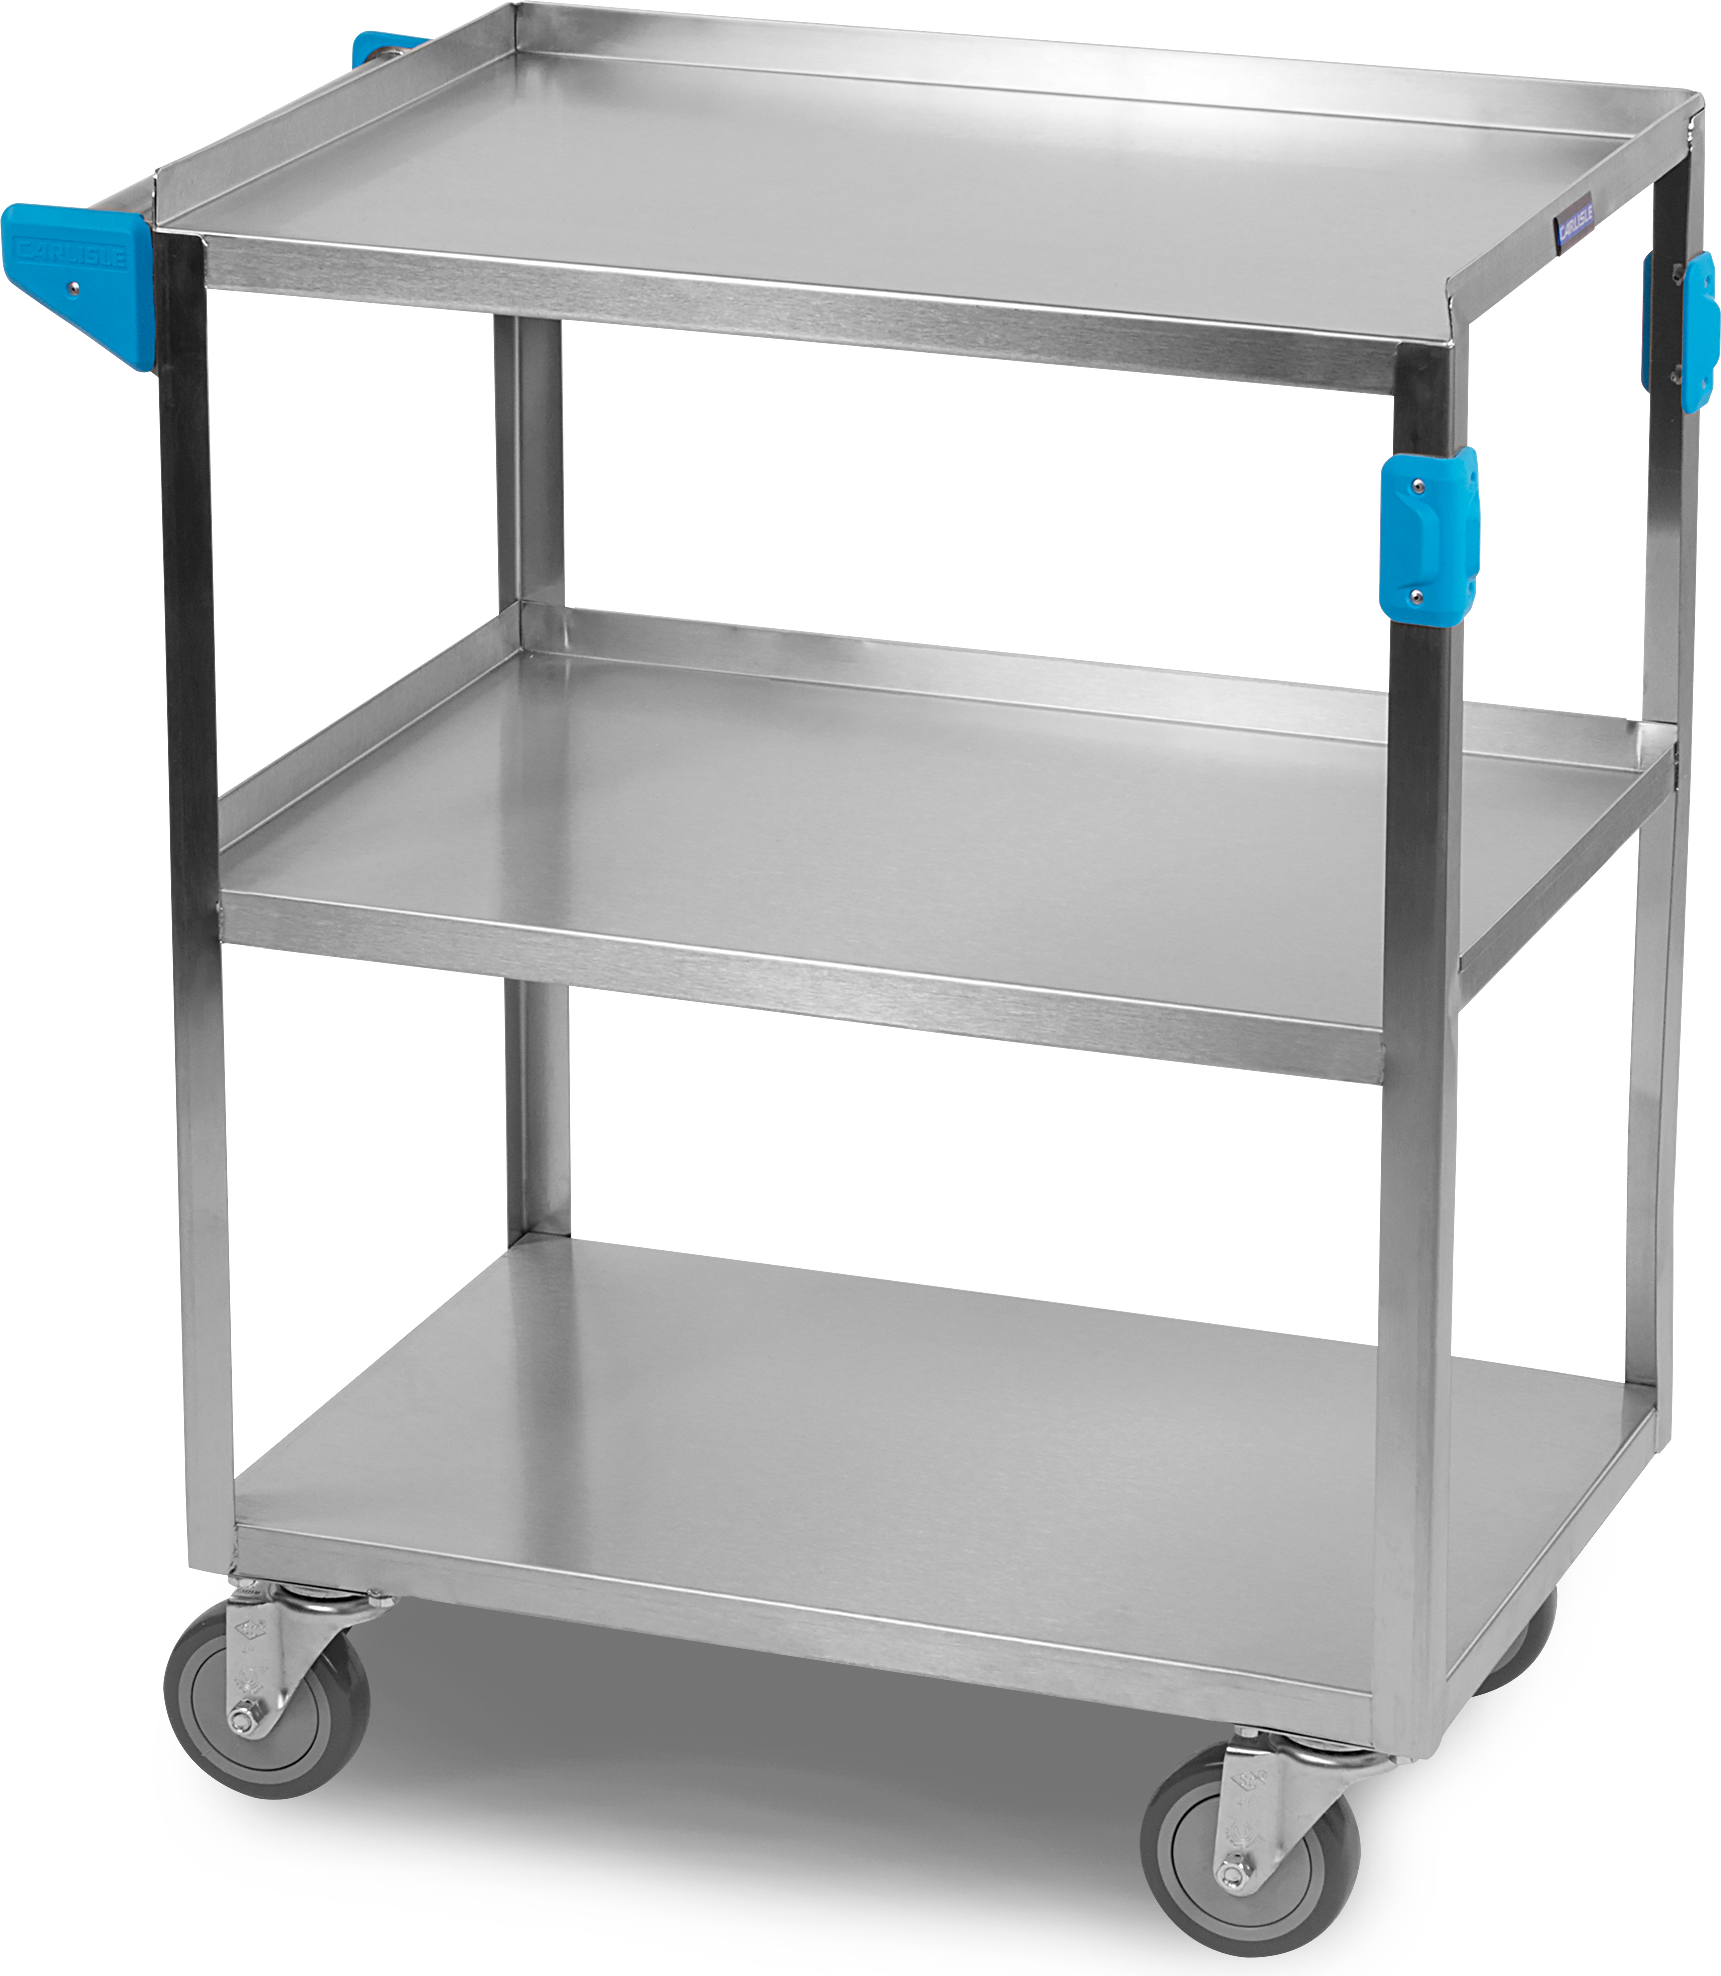 3 Shelf Stainless Steel Utility Cart 500 lb Capacity 15.5W x 24L - Stainless Steel